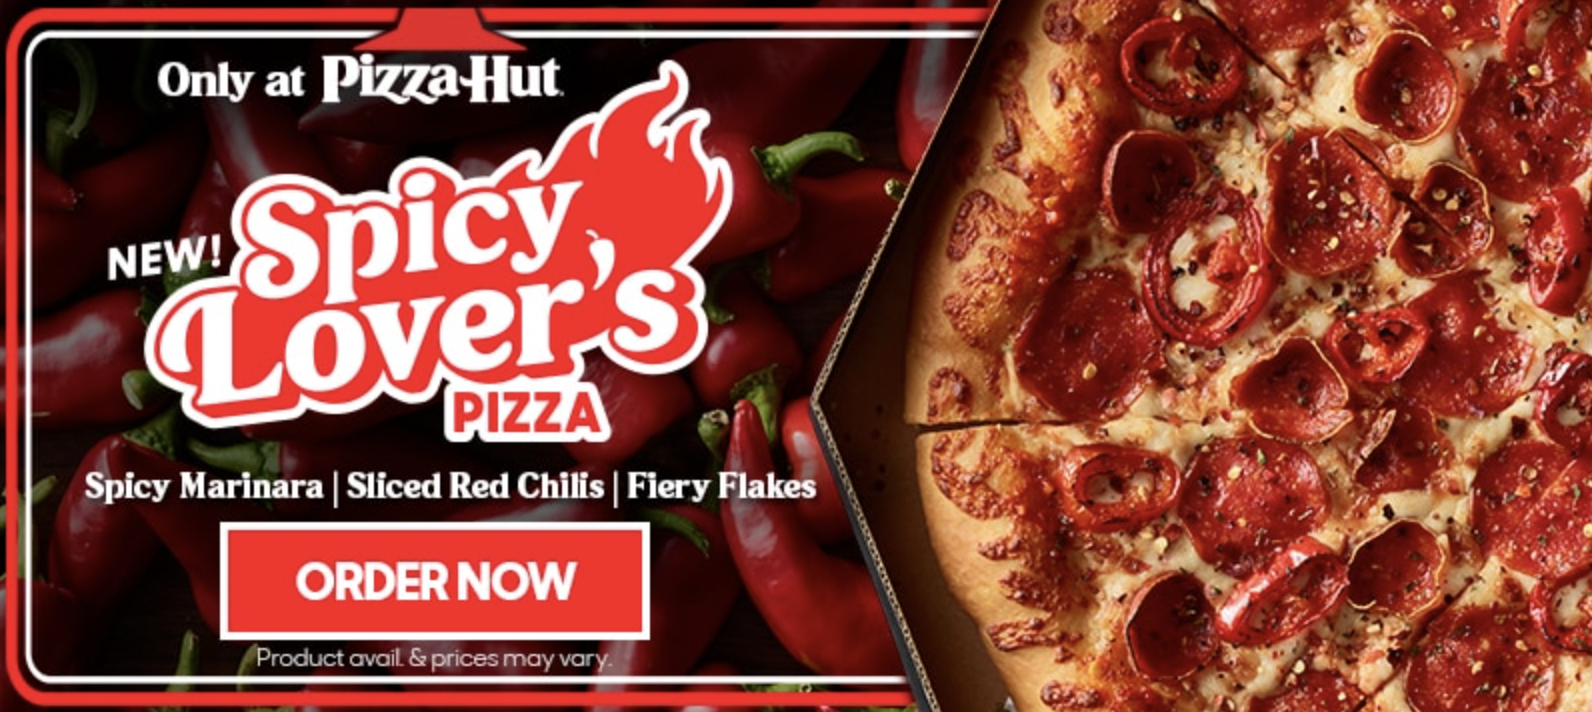 Pizza Hut’s new “Spicy Lover’s Pizza.”